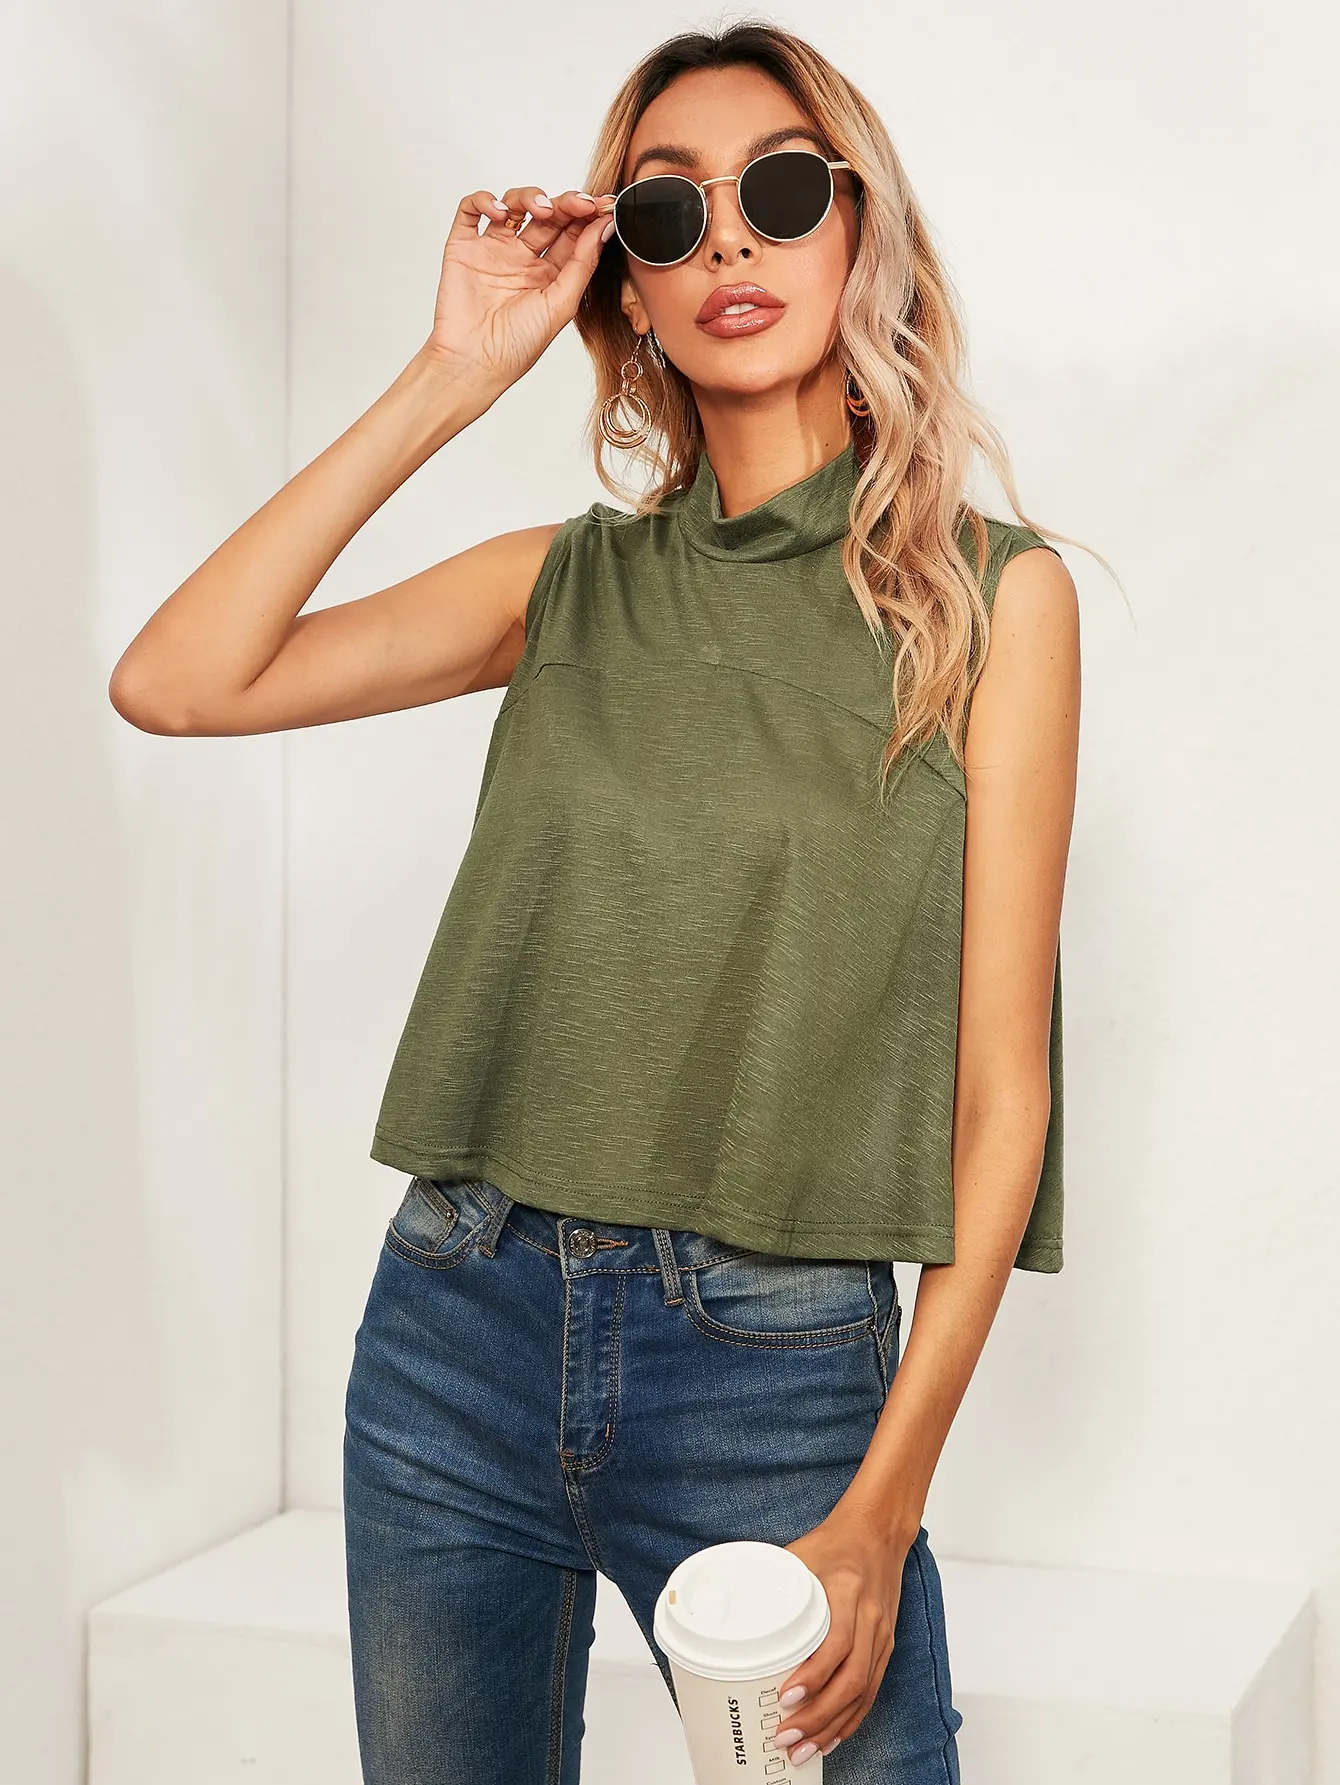 Stock Clearance Sale Online Clearance Sale In Bulk Cheap  Low Price Clearance t Shirts For Sale Women Green Halter Neck t-Shirt